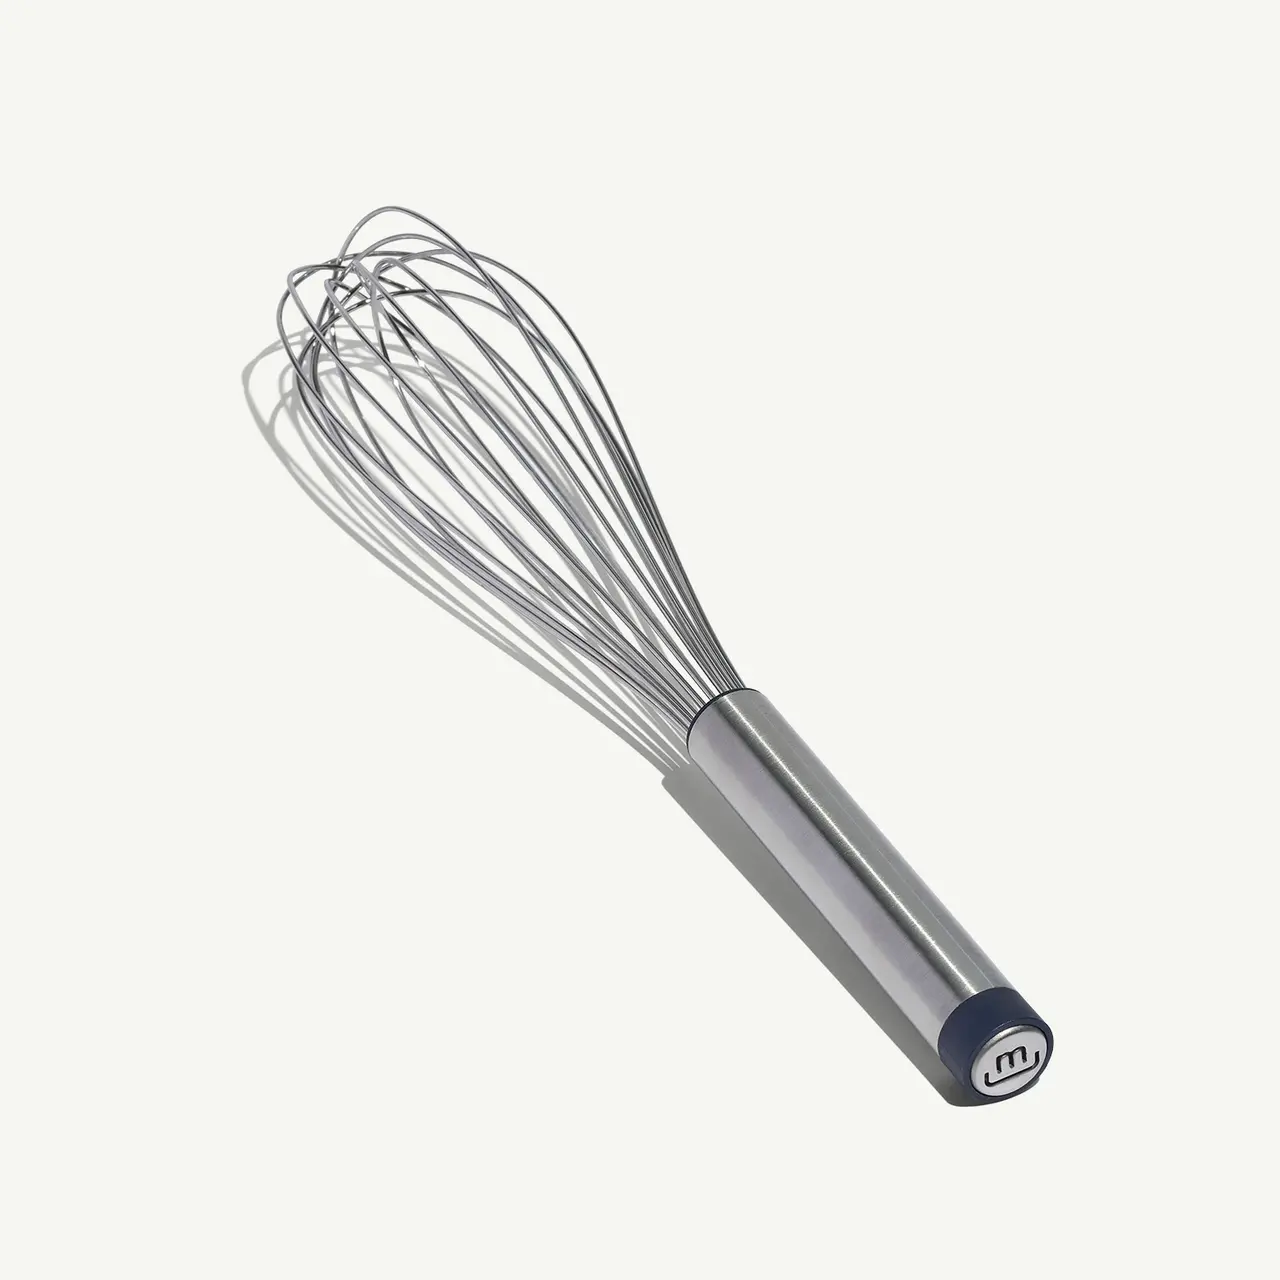 A metal whisk with a cylindrical handle lies against a plain background.